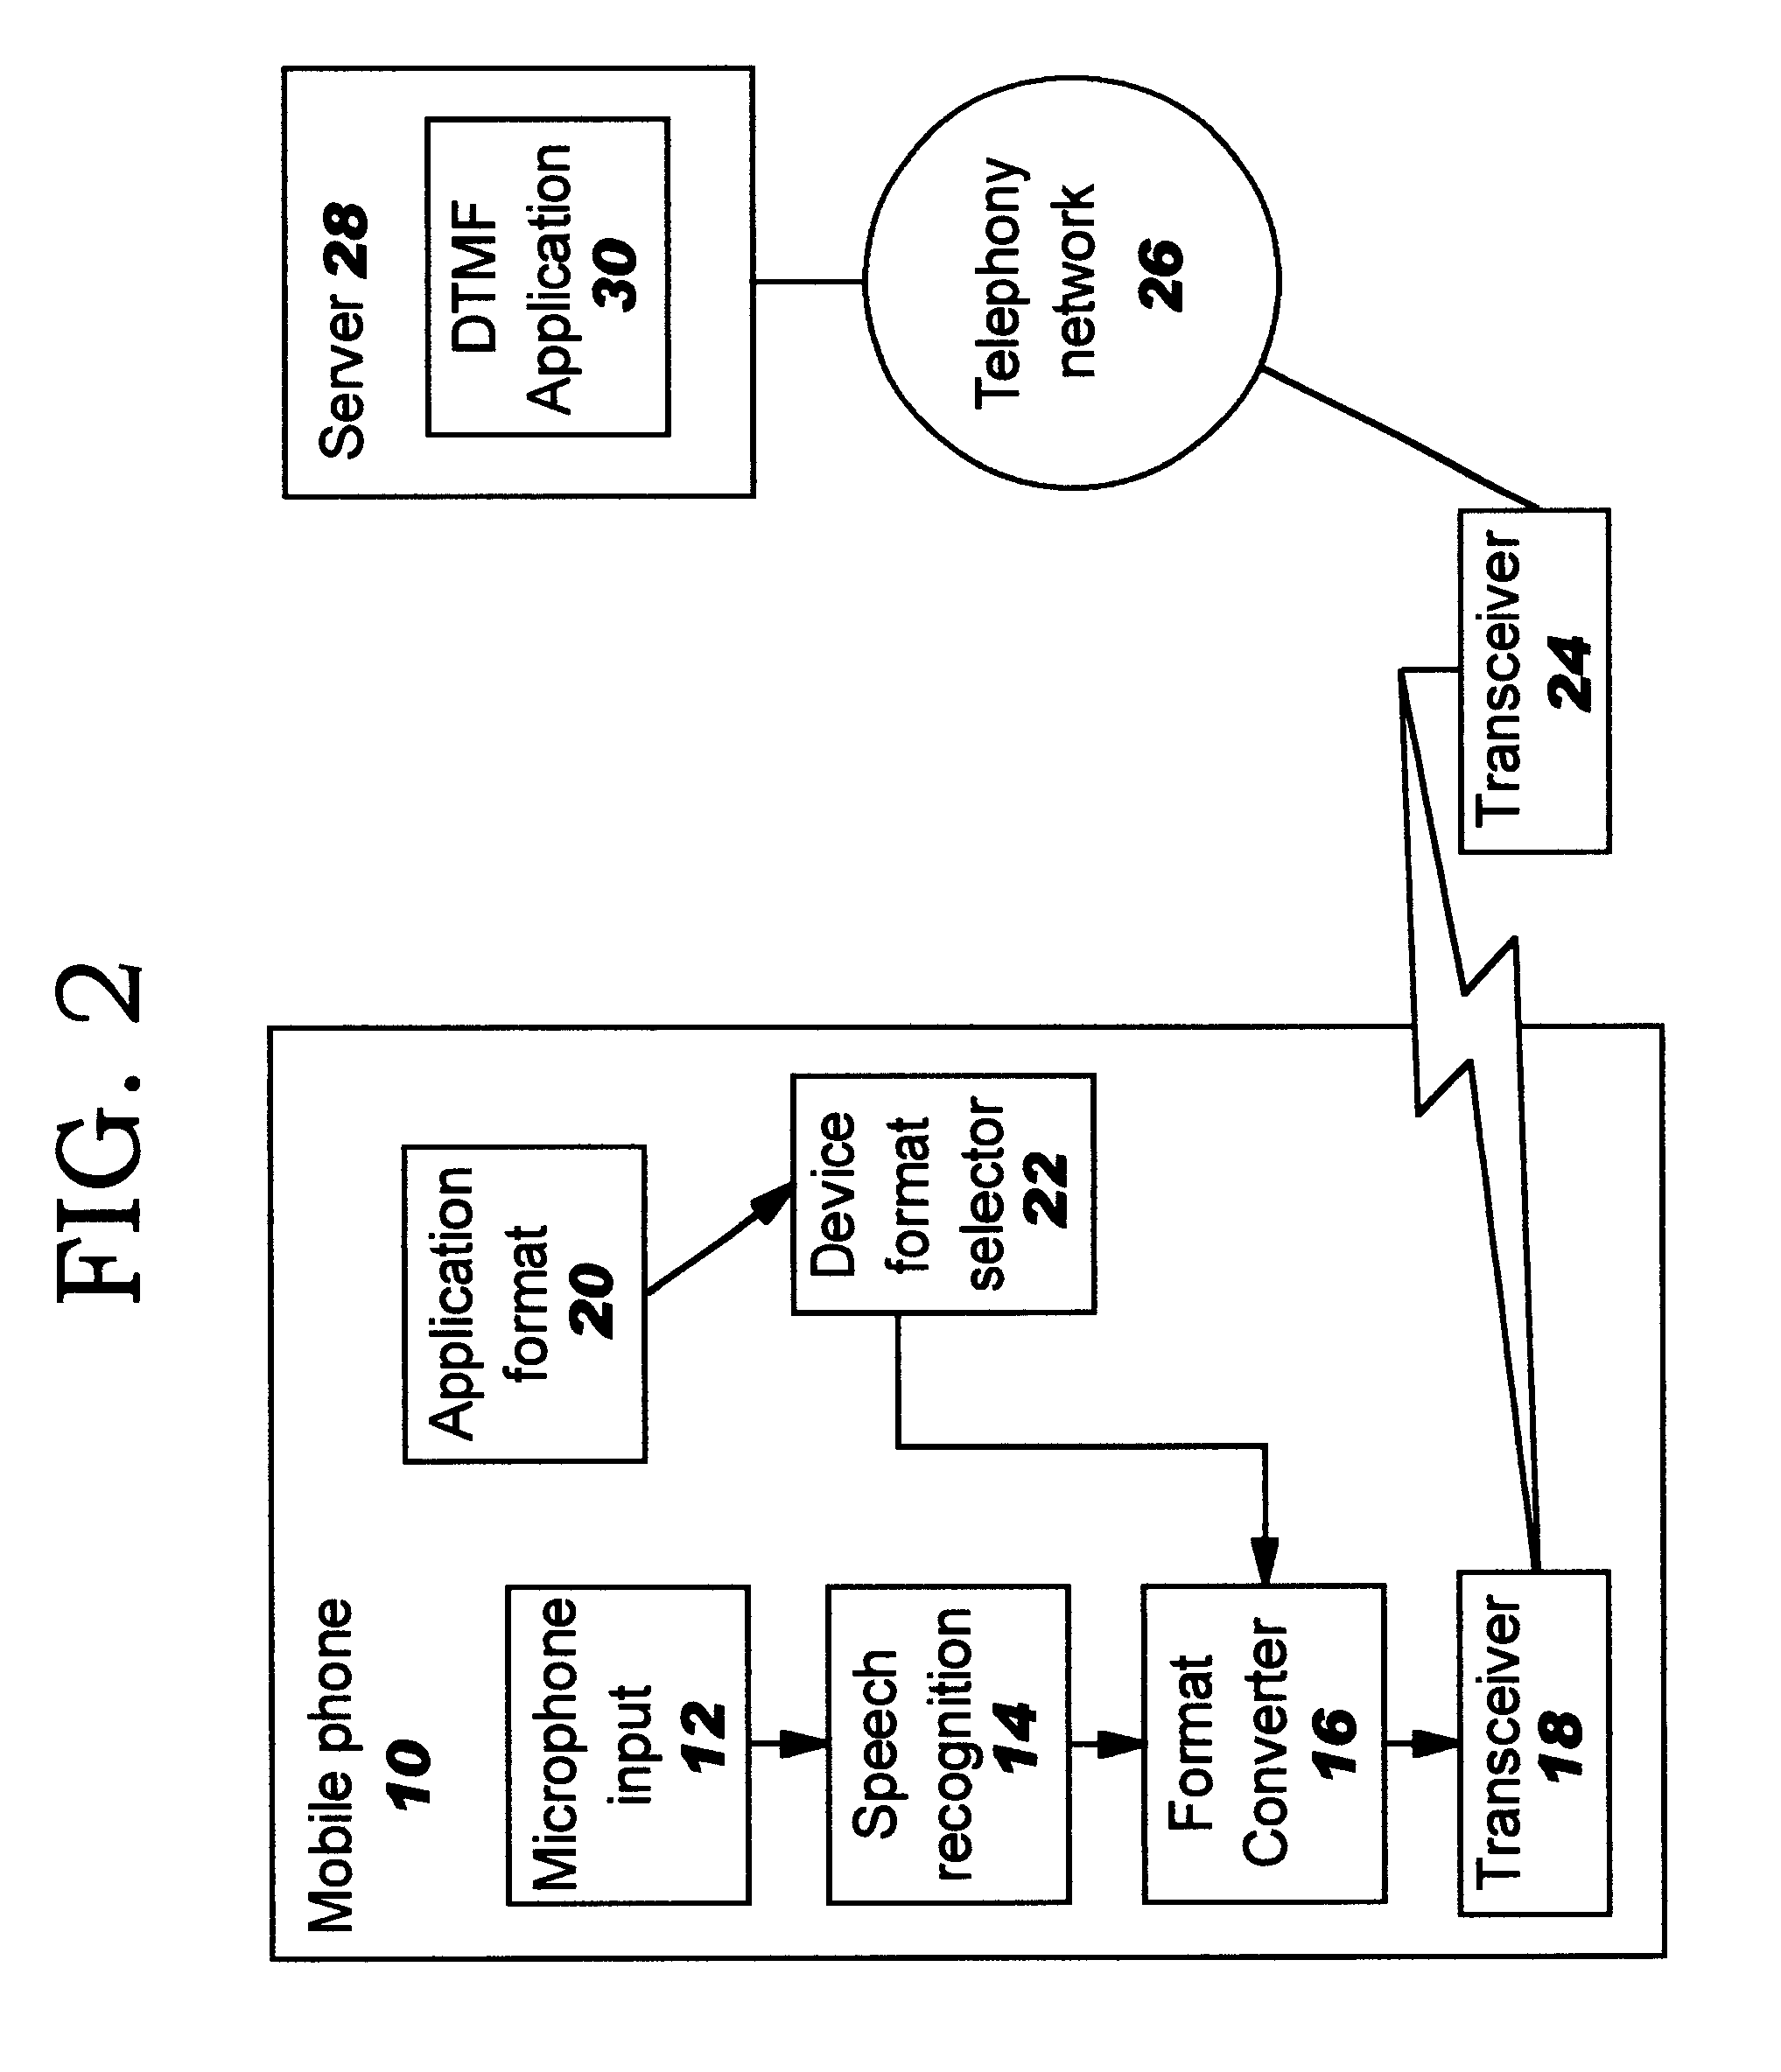 Speech encoding in a client server system